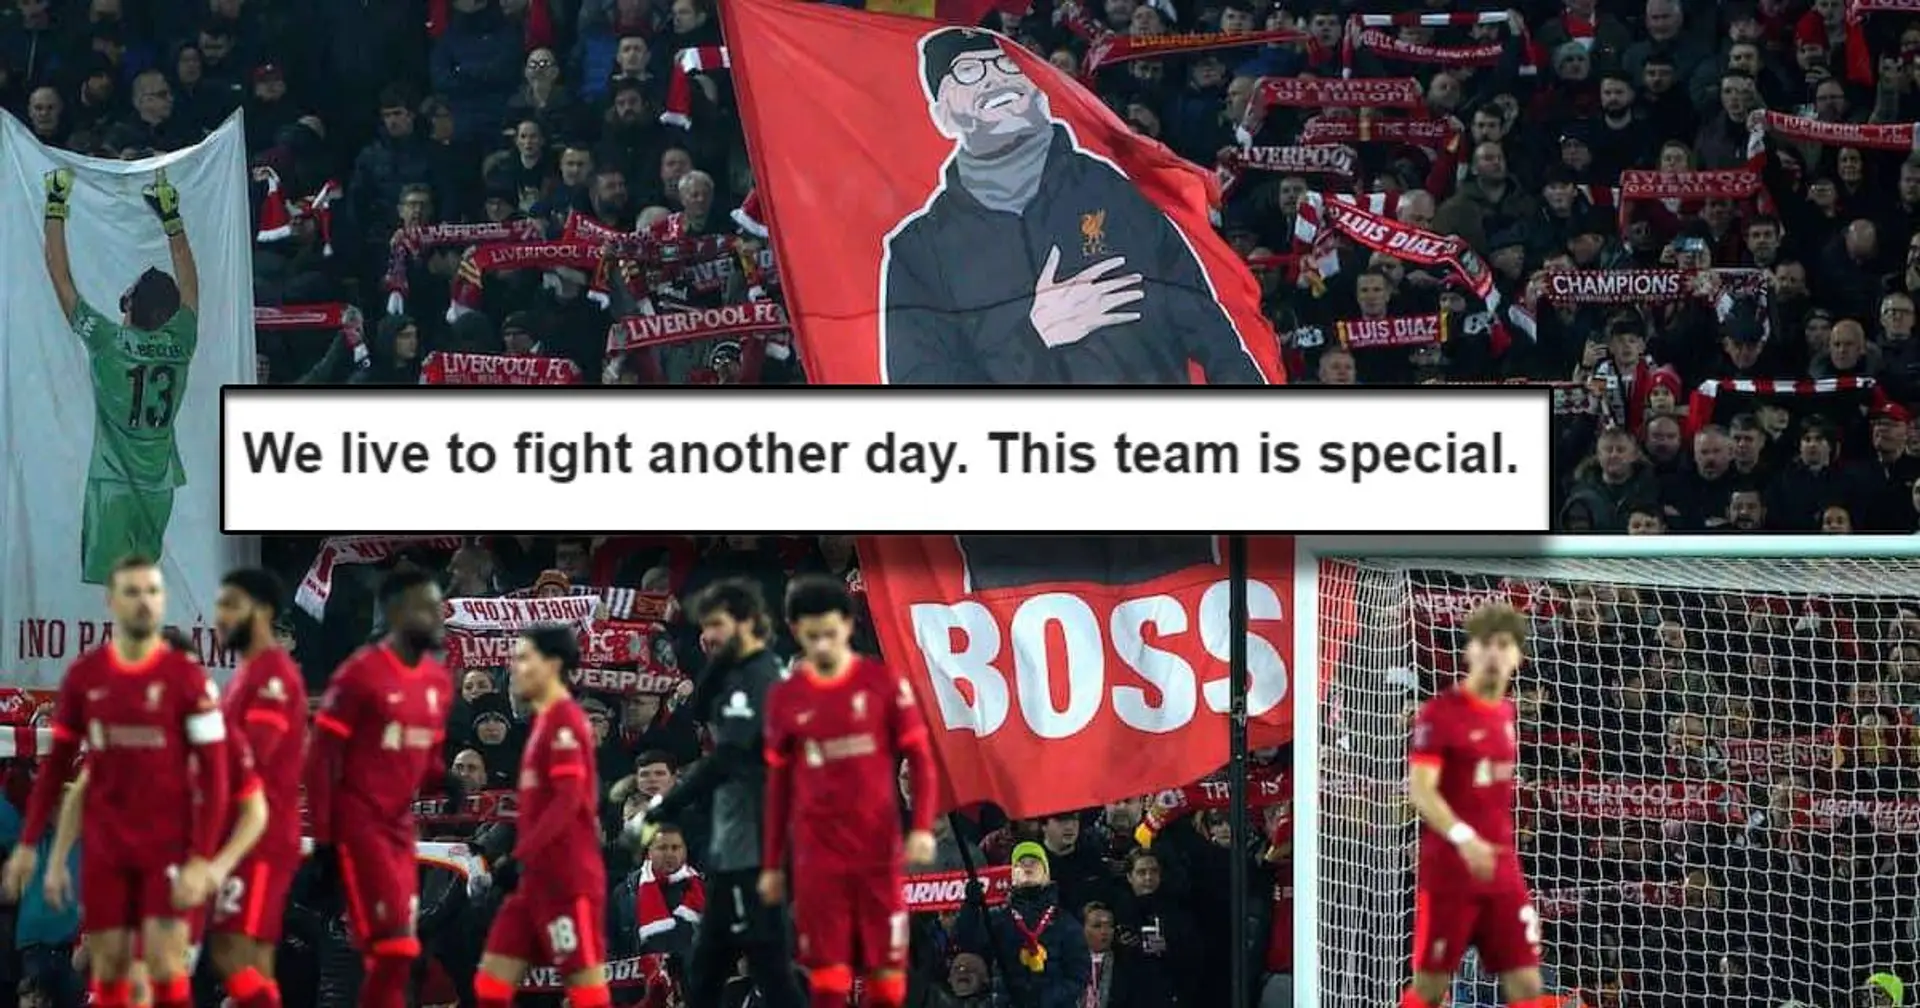 'Could not be prouder of this team': Liverpool fans react to missing out on league title by one point 